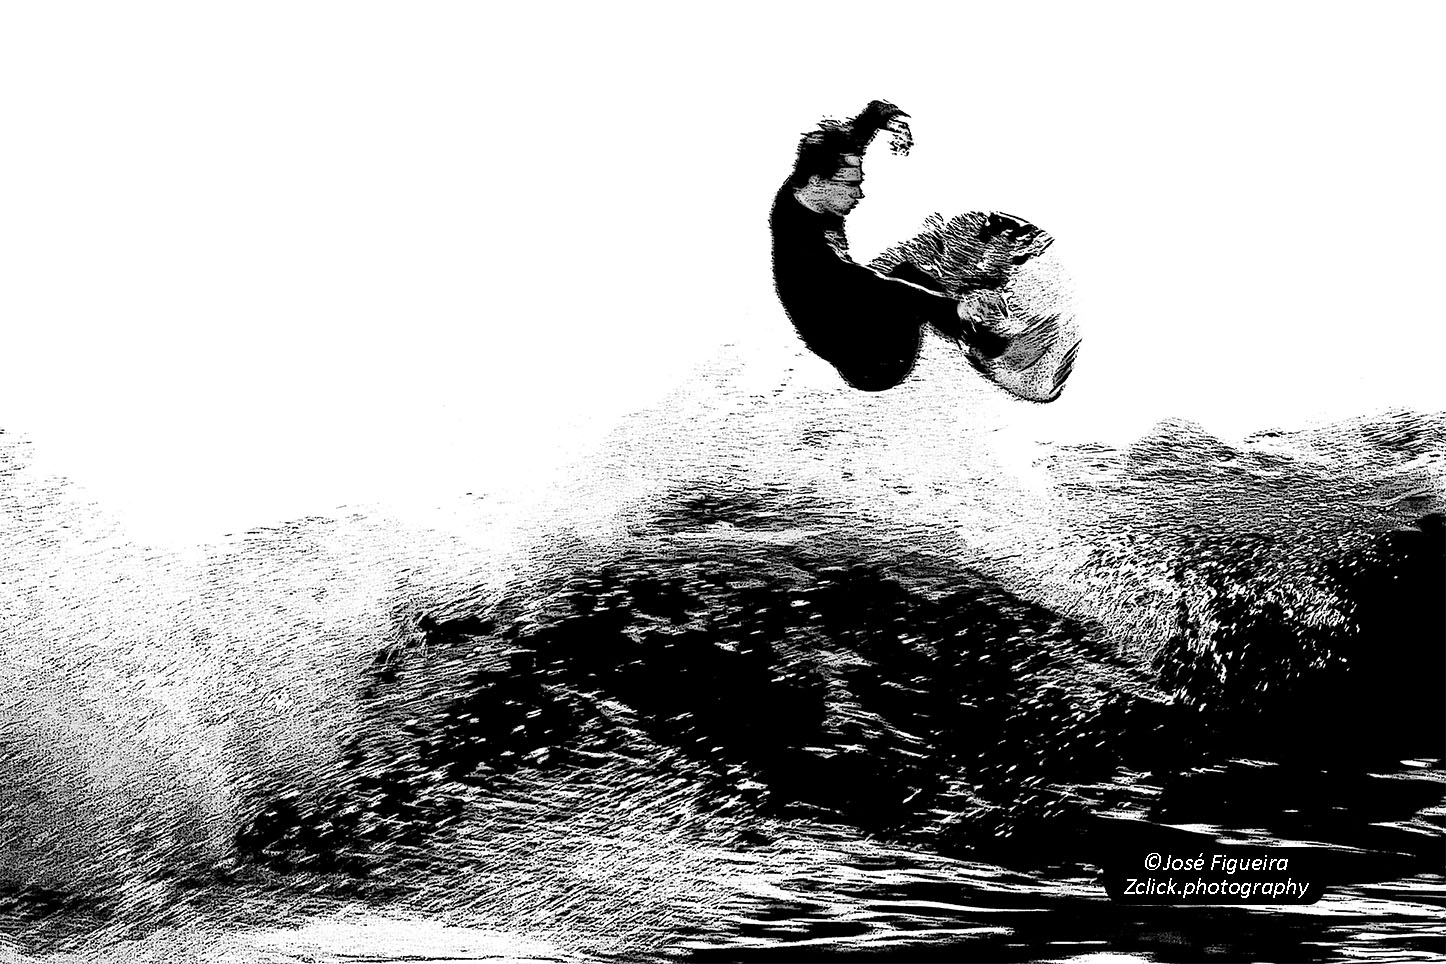 Black and white photographic essays on surfing (1)...